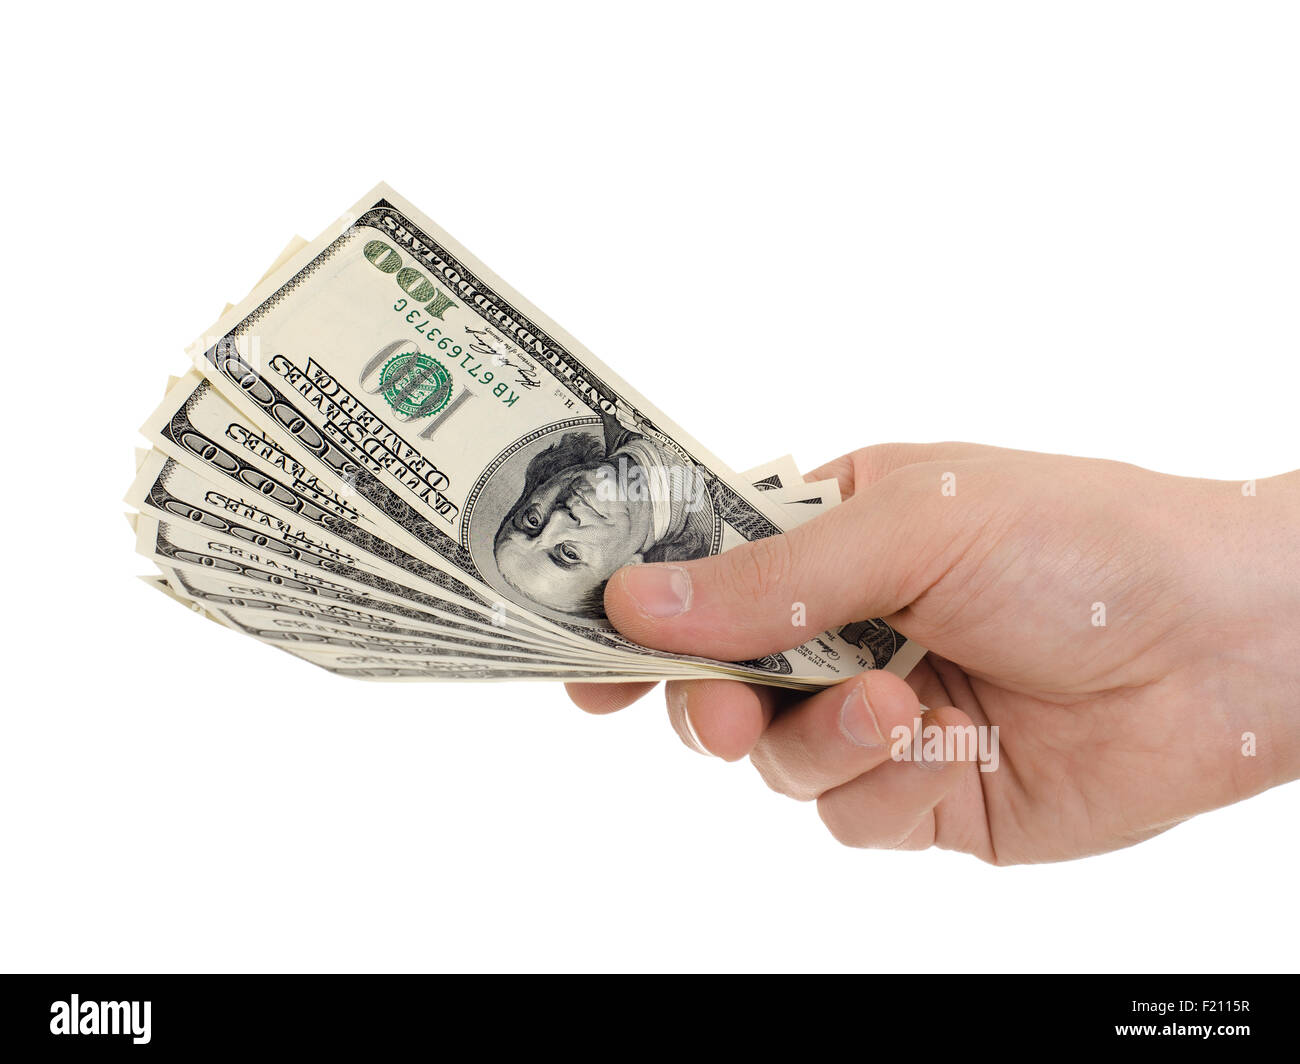 cash  currency note dollar in hand, on white background, isolated Stock Photo